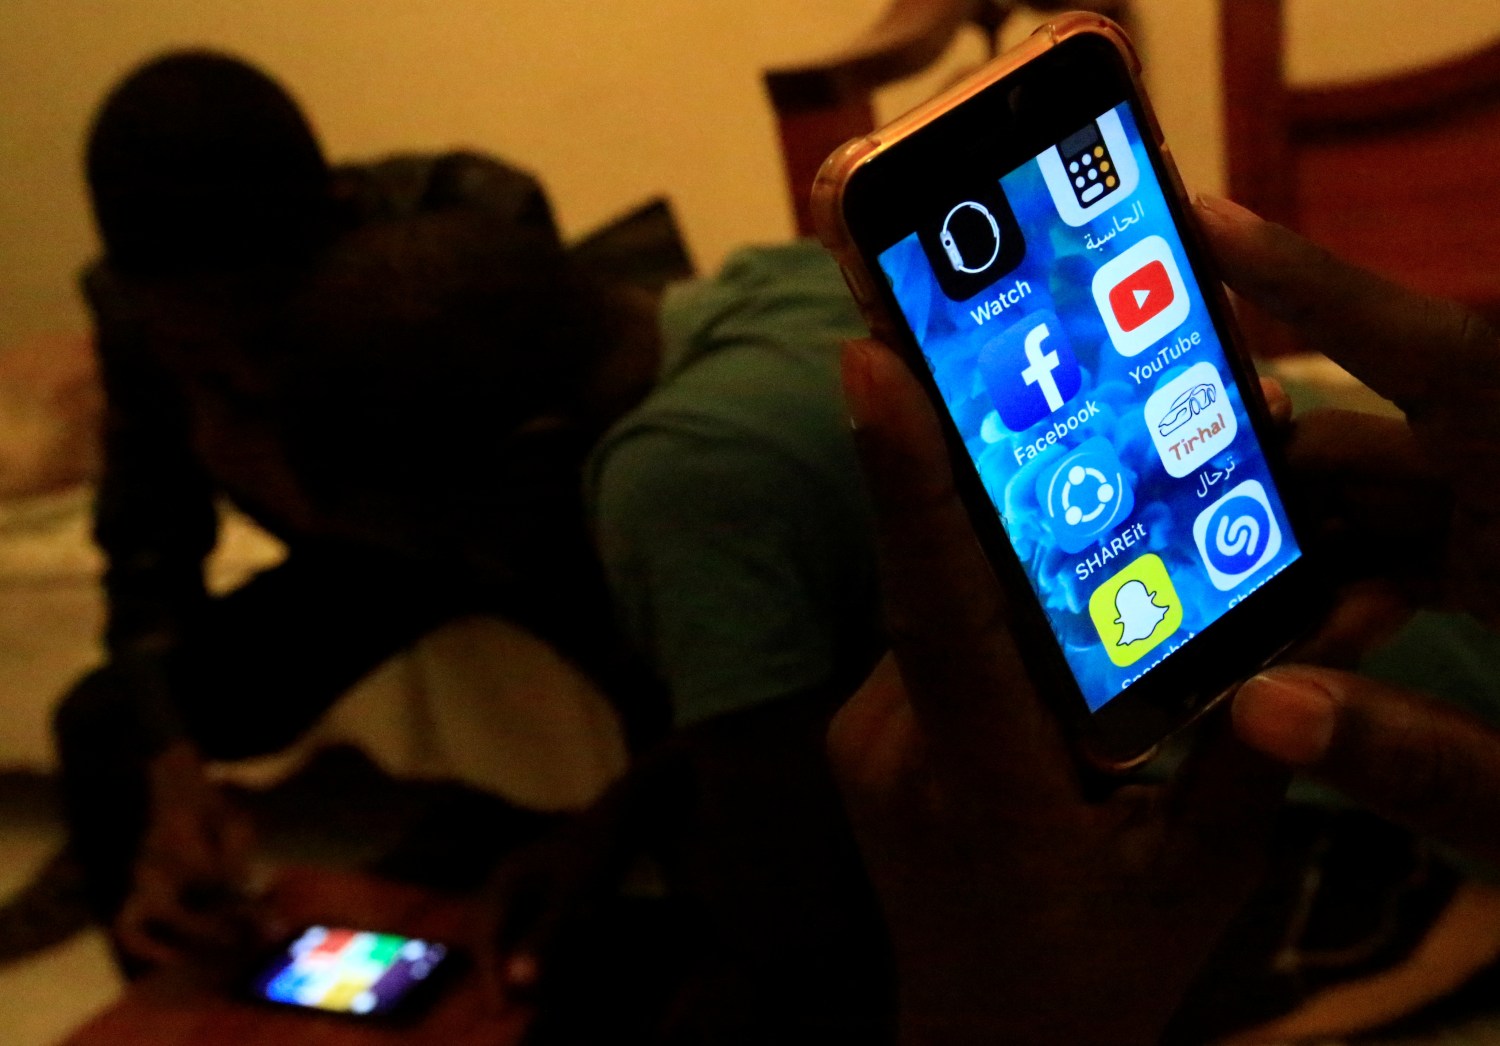 A Sudanese man holds his phone with restricted internet access social media platforms, in Khartoum, Sudan January 1, 2019. Picture taken January 1, 2019. REUTERS/Mohamed Nureldin Abdallah